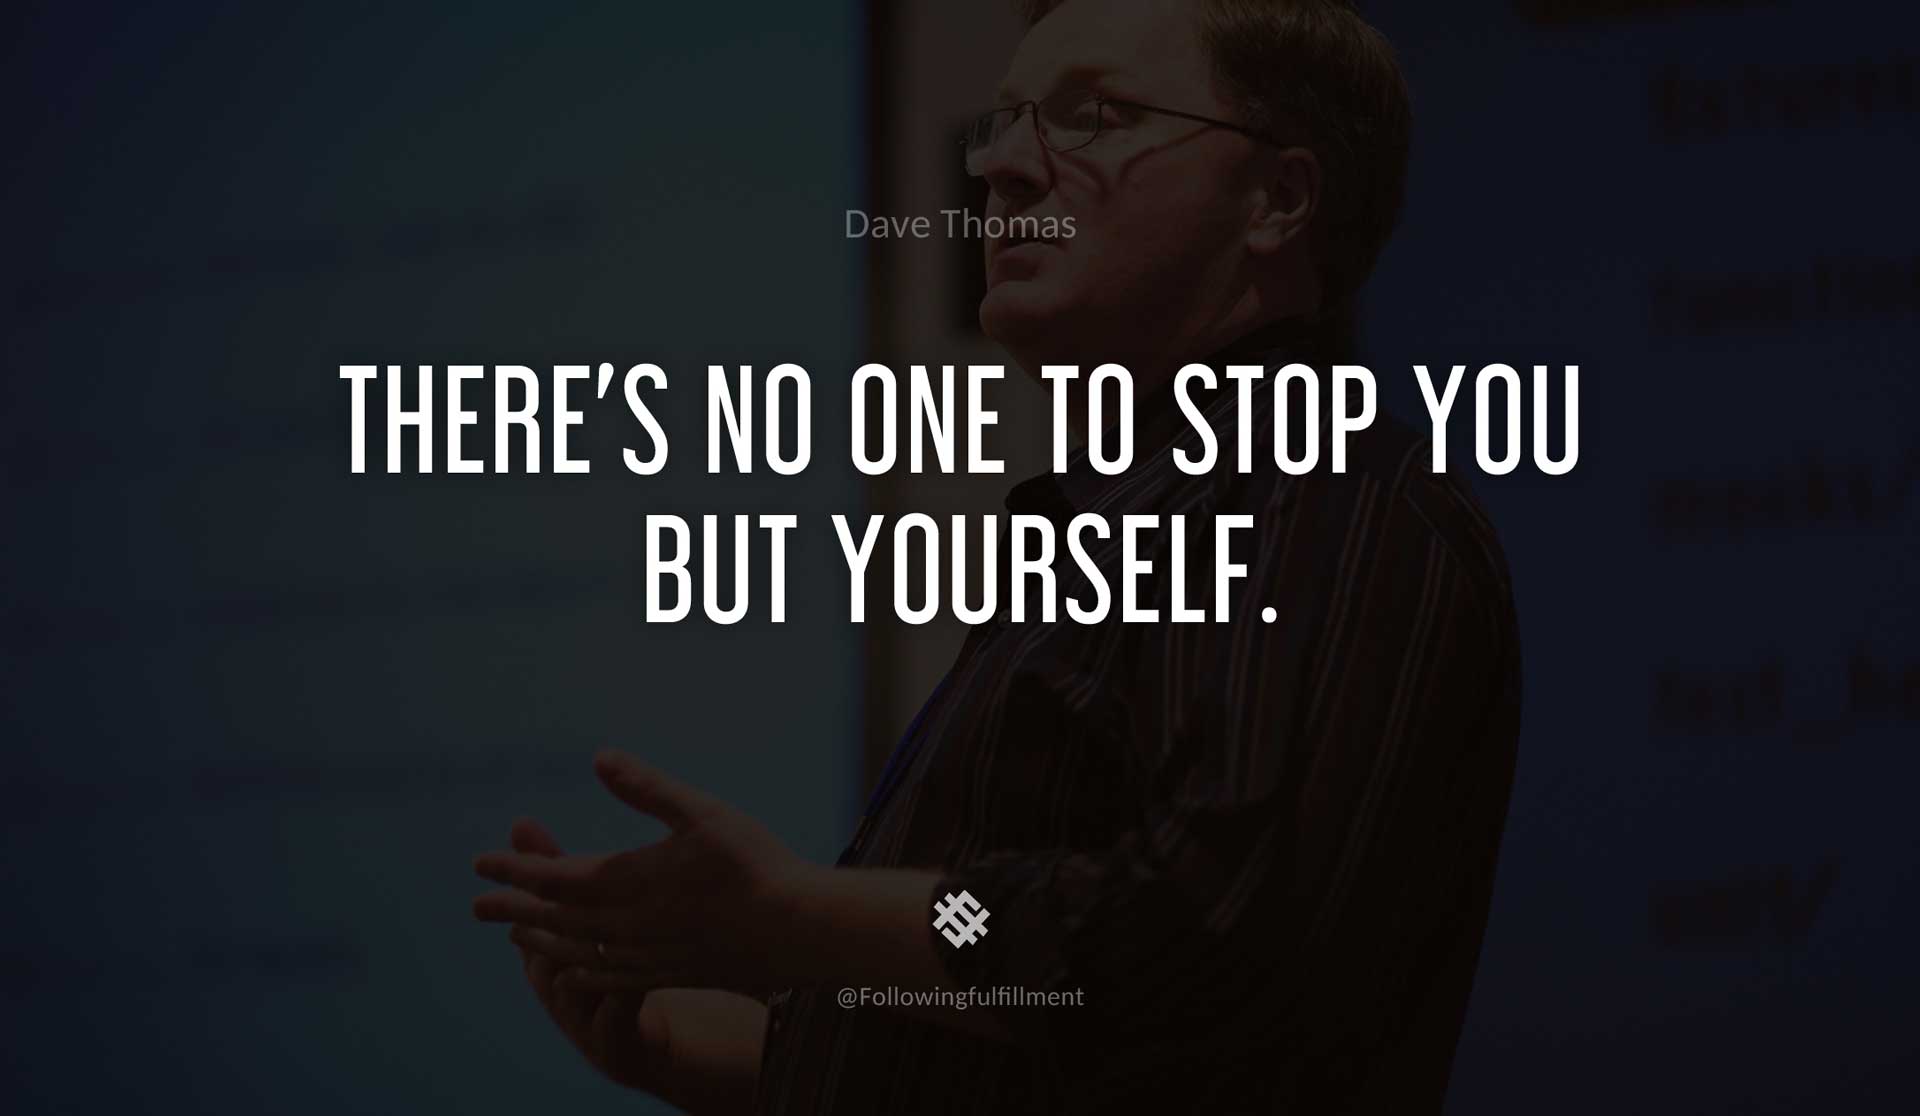 There's-no-one-to-stop-you-but-yourself.-DAVE-THOMAS-Quote.jpg